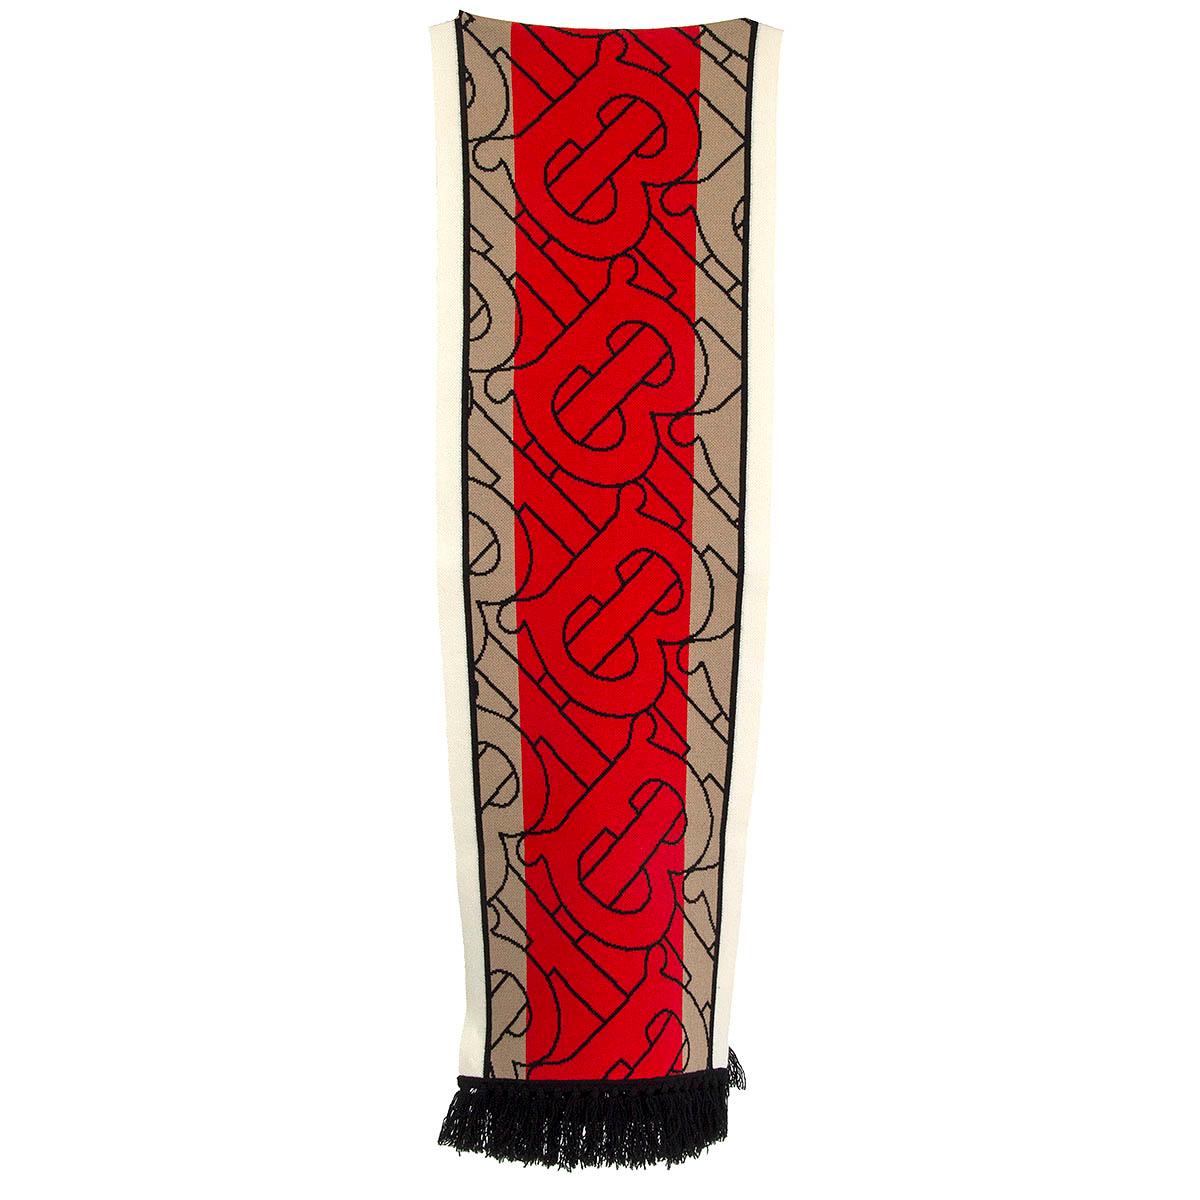 100% authentic Burberry striped monogram colour-block Jacquard scarf in red, beige, black and off-white cashmere (100%) finished with hand-knotted tasseled fringes. Has been worn and is in excellent condition. 

Measurements
Width	30cm